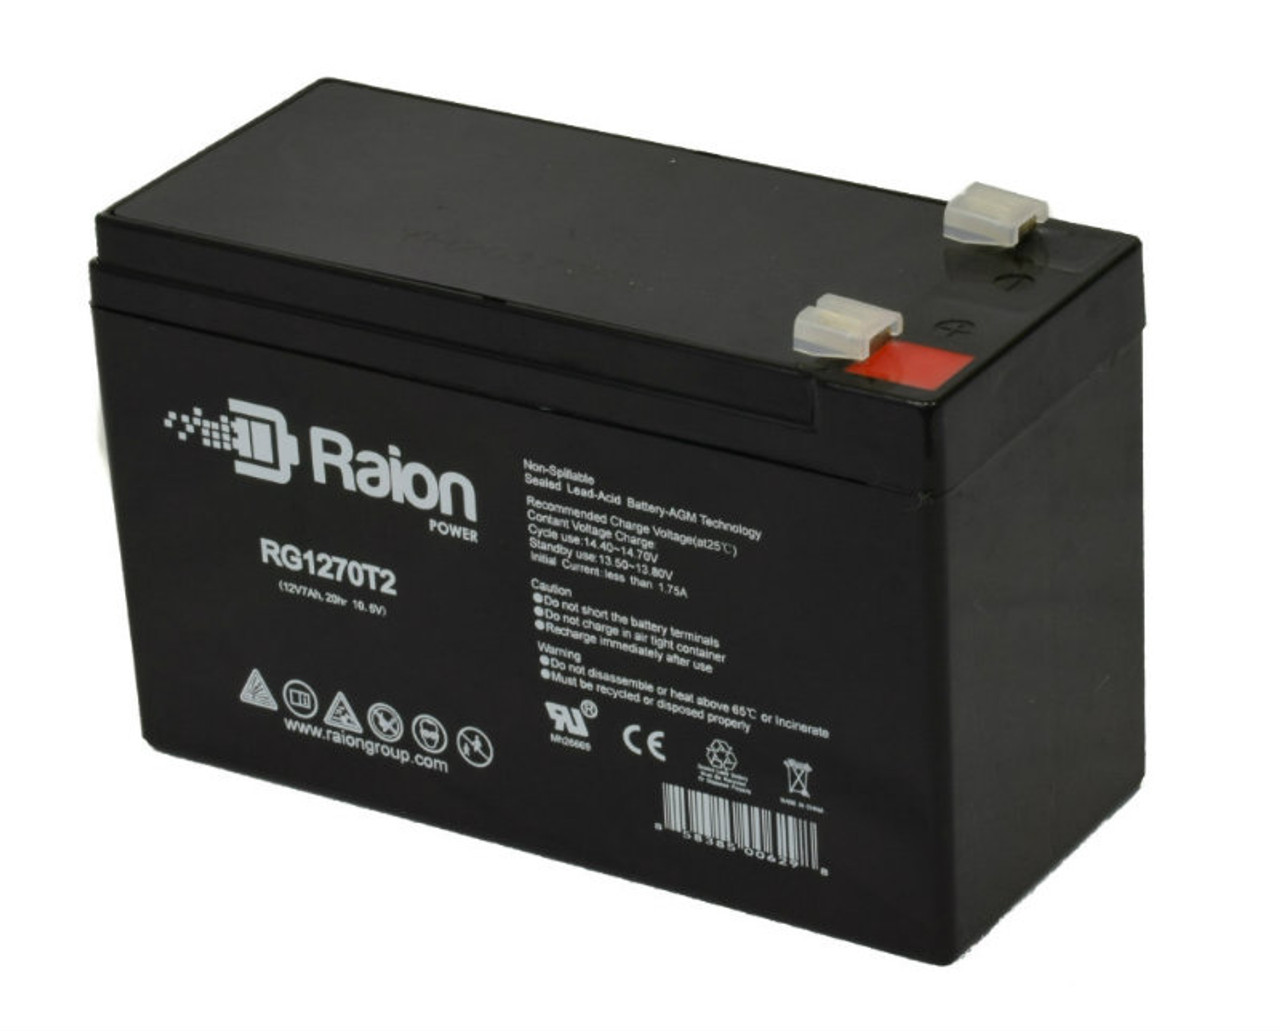 Raion Power Replacement 12V 7Ah RG1270T1 Fire Alarm Battery for Altronix AL201UL